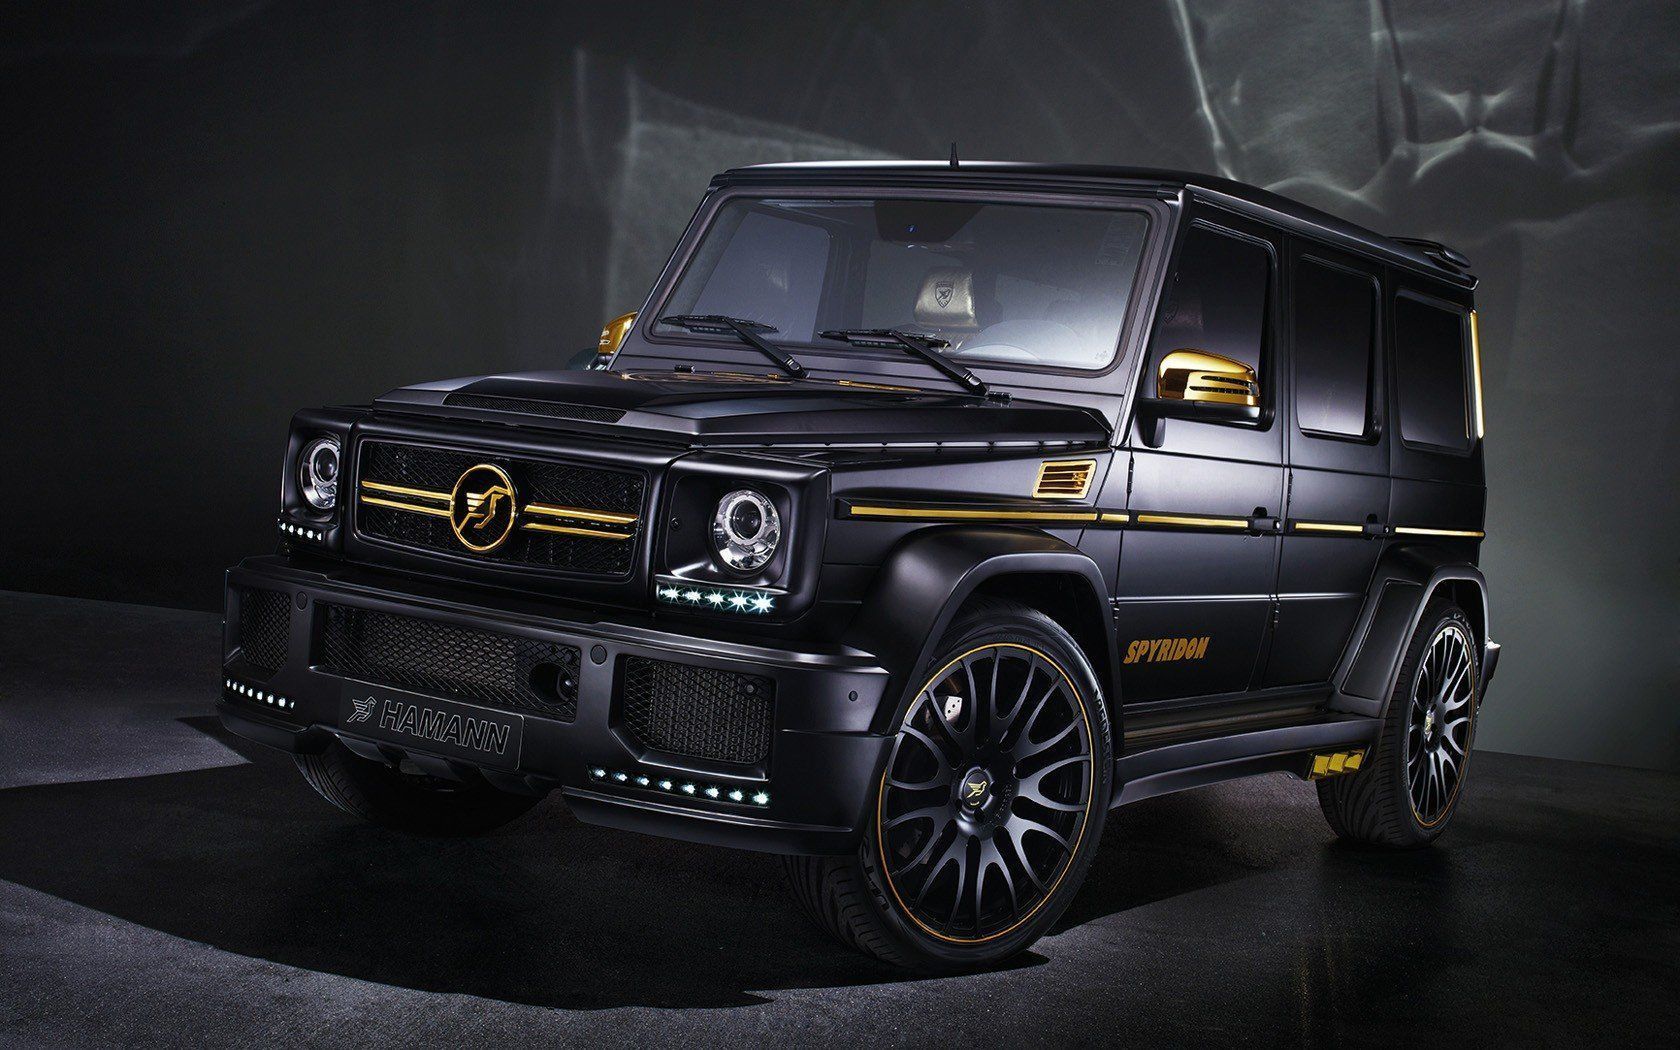 2013 Mansory Mercedes Benz G65 Amg W463 Suv Tuning - Mercedes G Klasse Amg , HD Wallpaper & Backgrounds